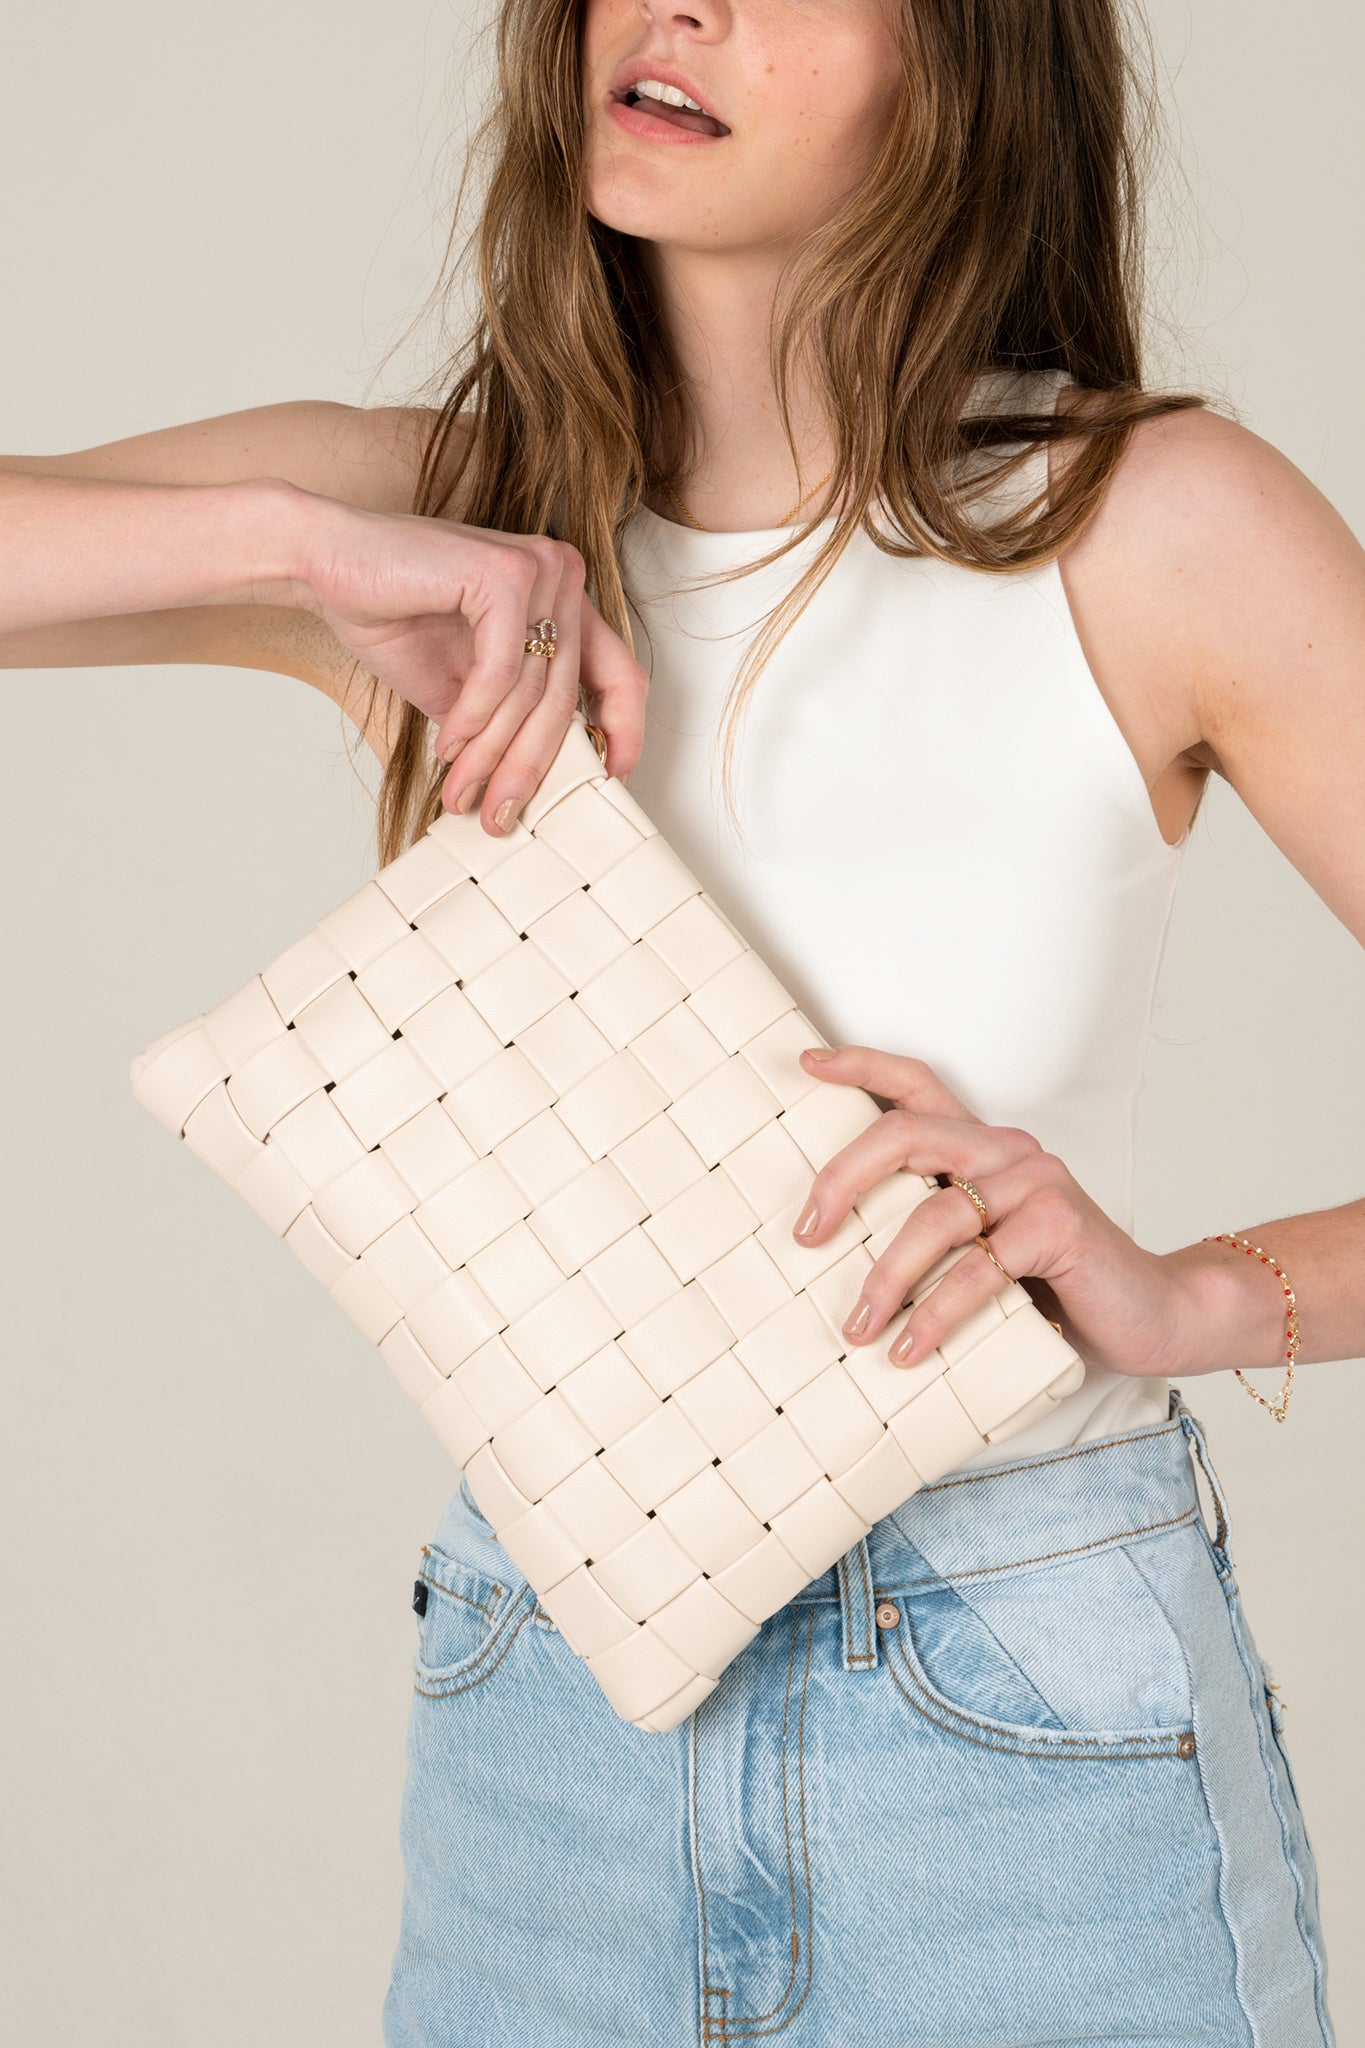 View 8 of Keen Woven Clutch in Ivory, a Bags from Larrea Cove. Detail: .